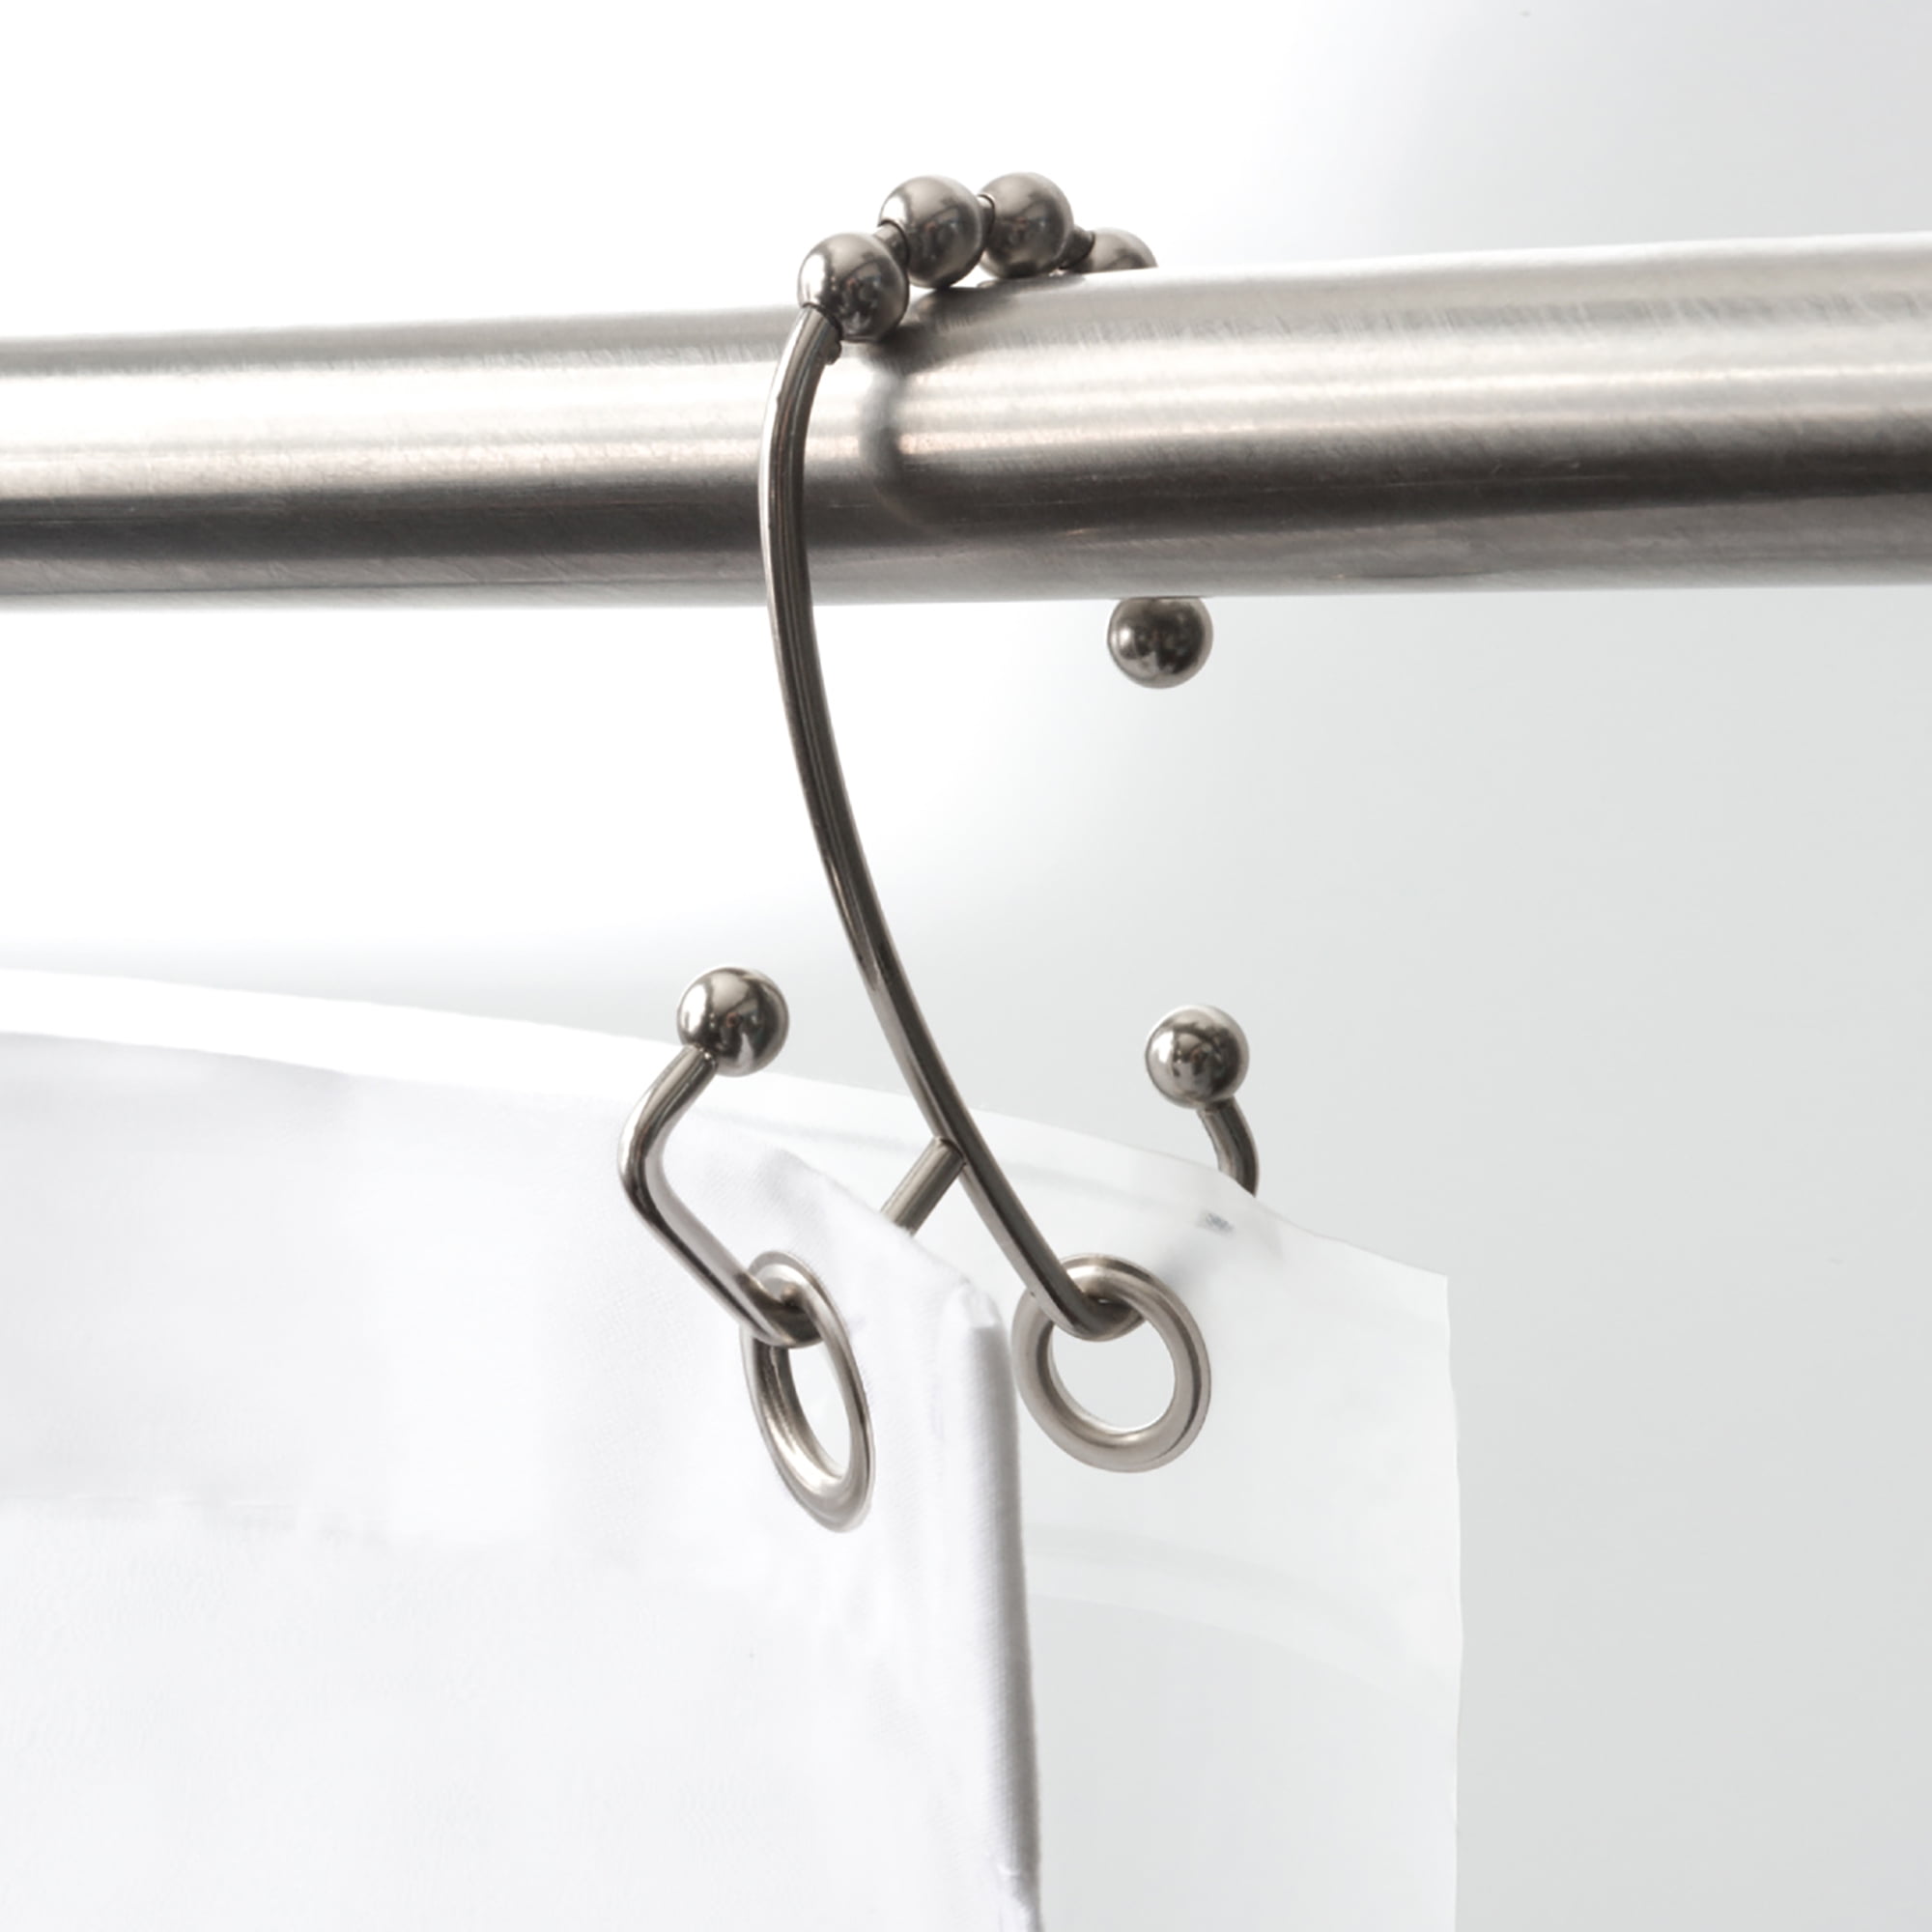 Set of 12 Onerbuy Stainless Steel Shower Curtain Hook Rings Double Glide with Smooth Roller Balls